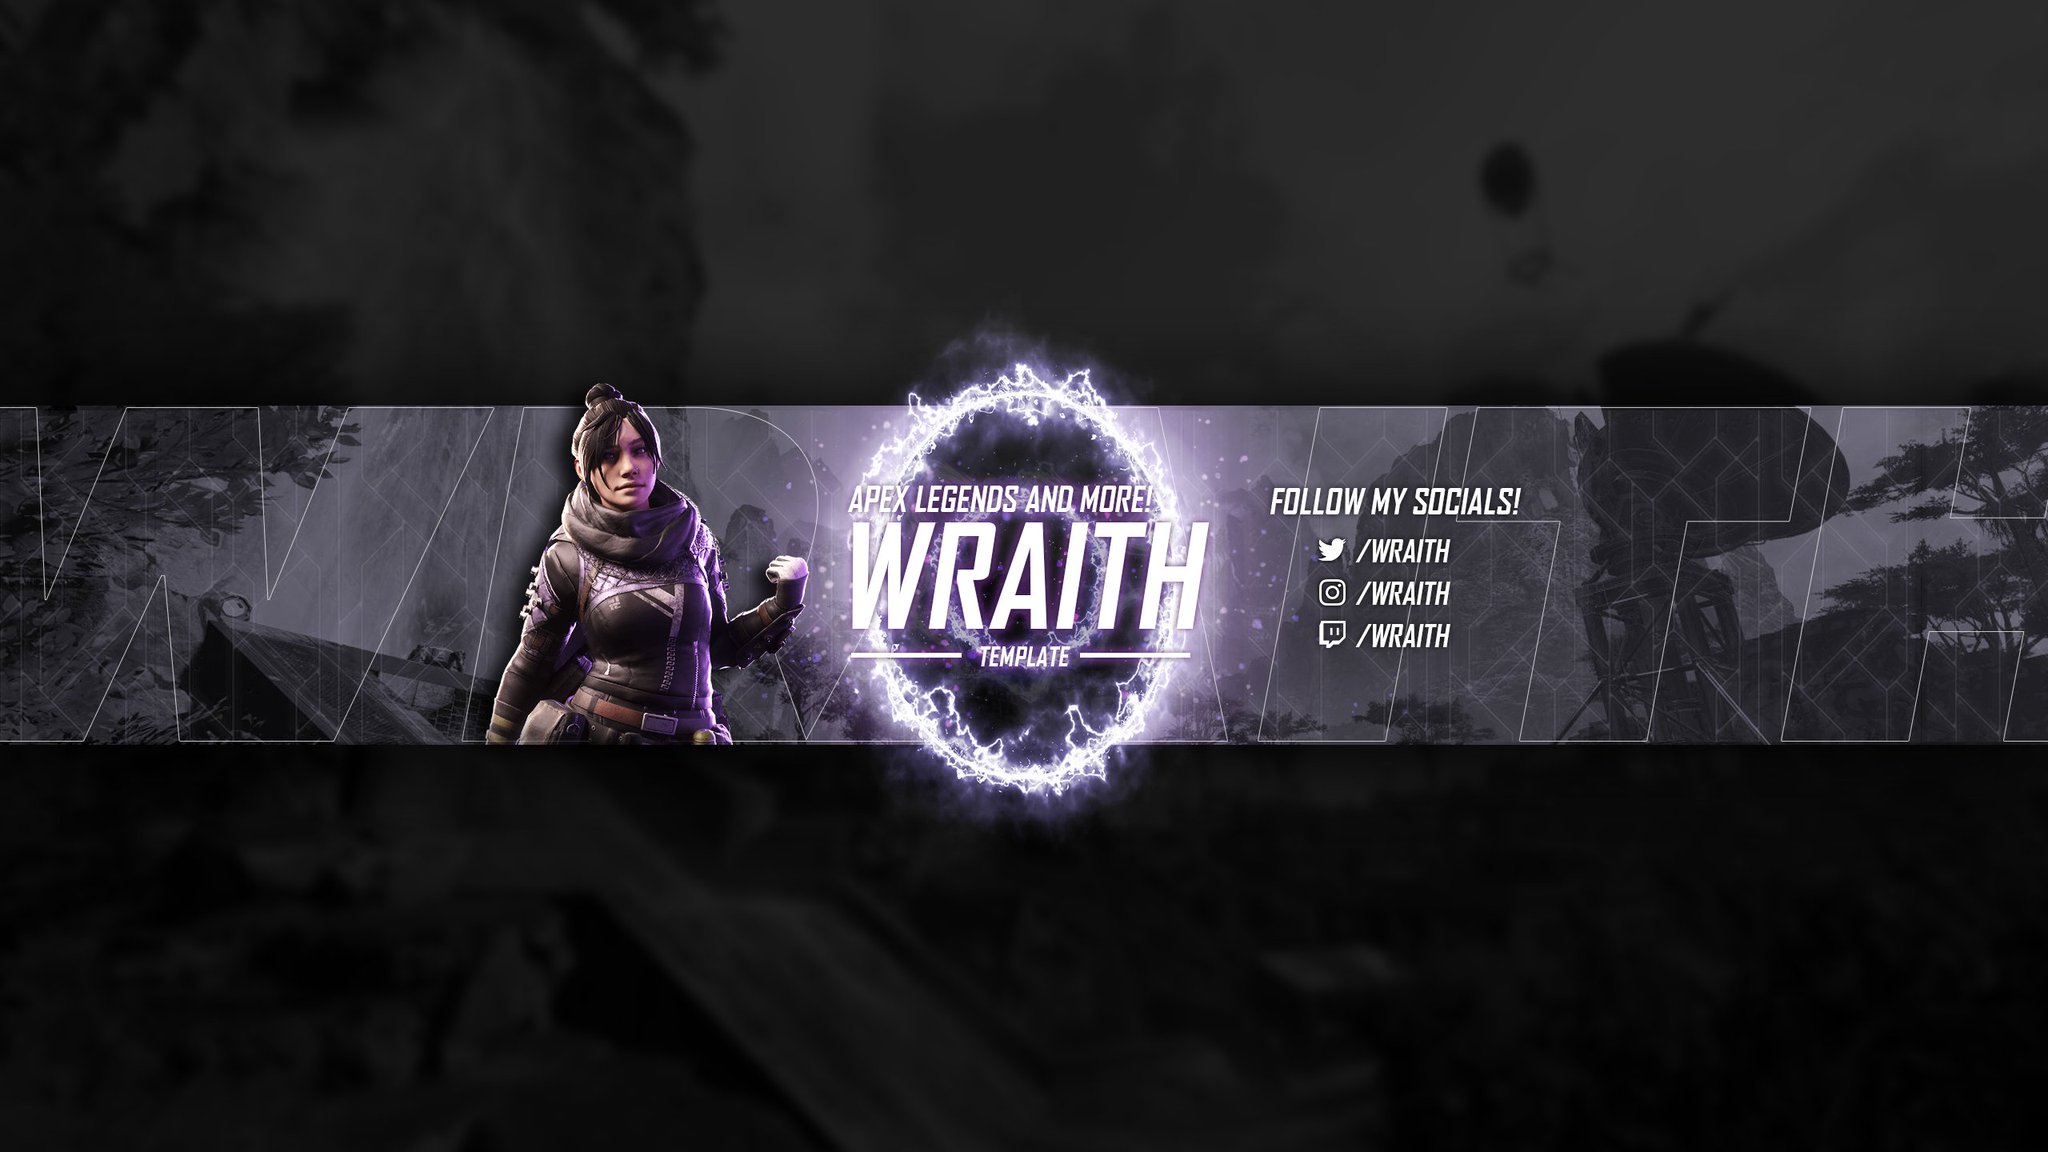 Jerfx Commissions Are Open Apex Legends Wraith Youtube Banner Template Dm Me For Commissions Or If You Re Interested To Pick This One Up